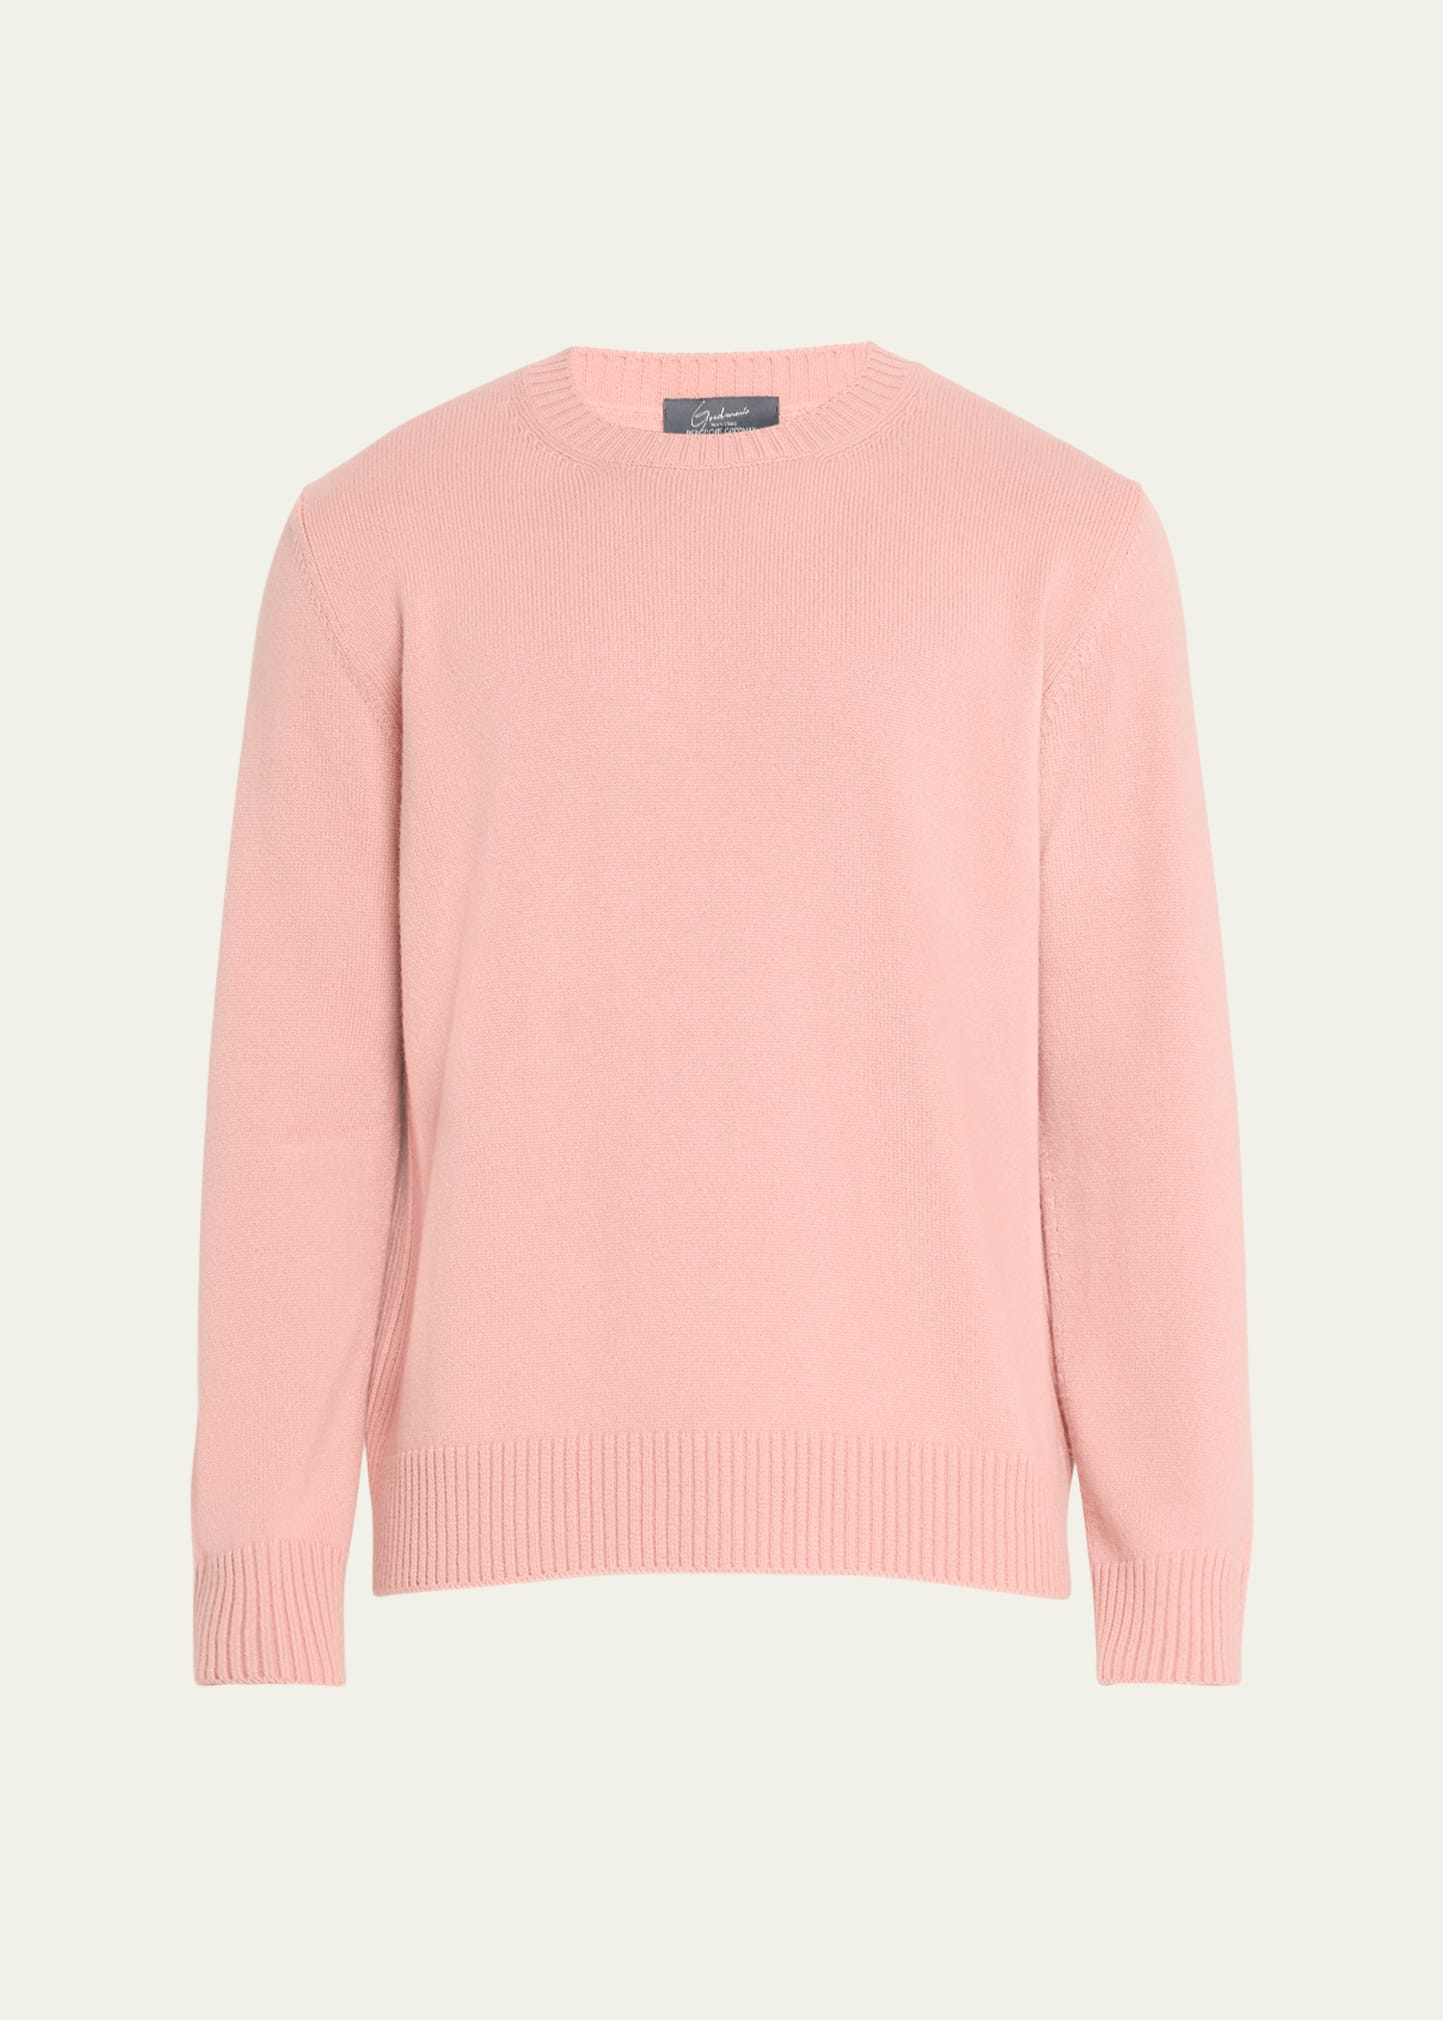 Goodman's Men's Rib Baby Cashmere Pullover In Pink